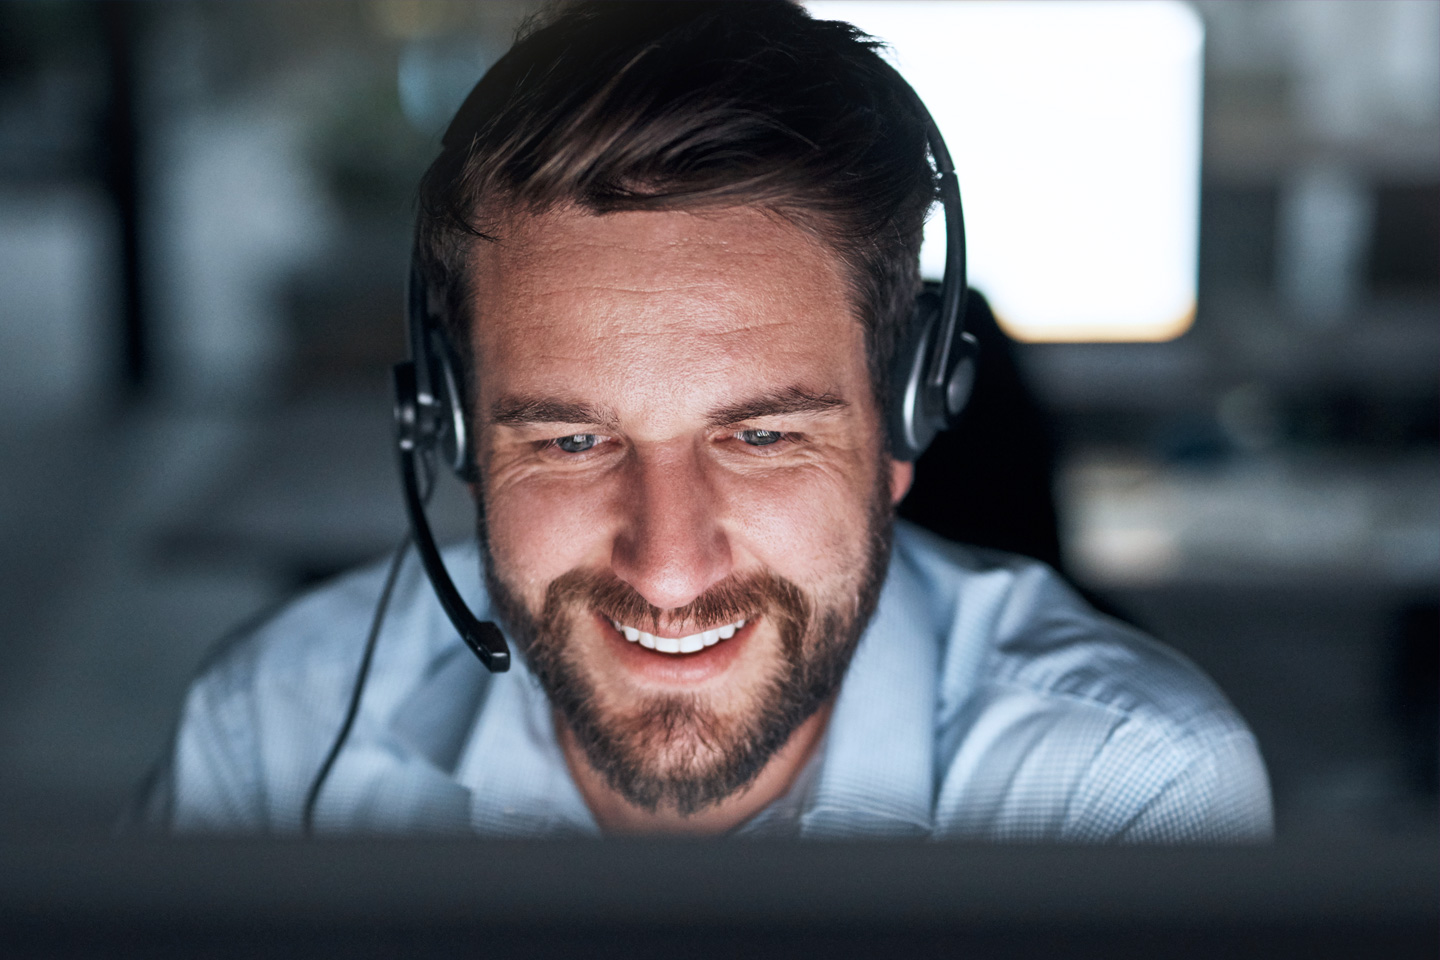 Man with headphone smiling looking at computer